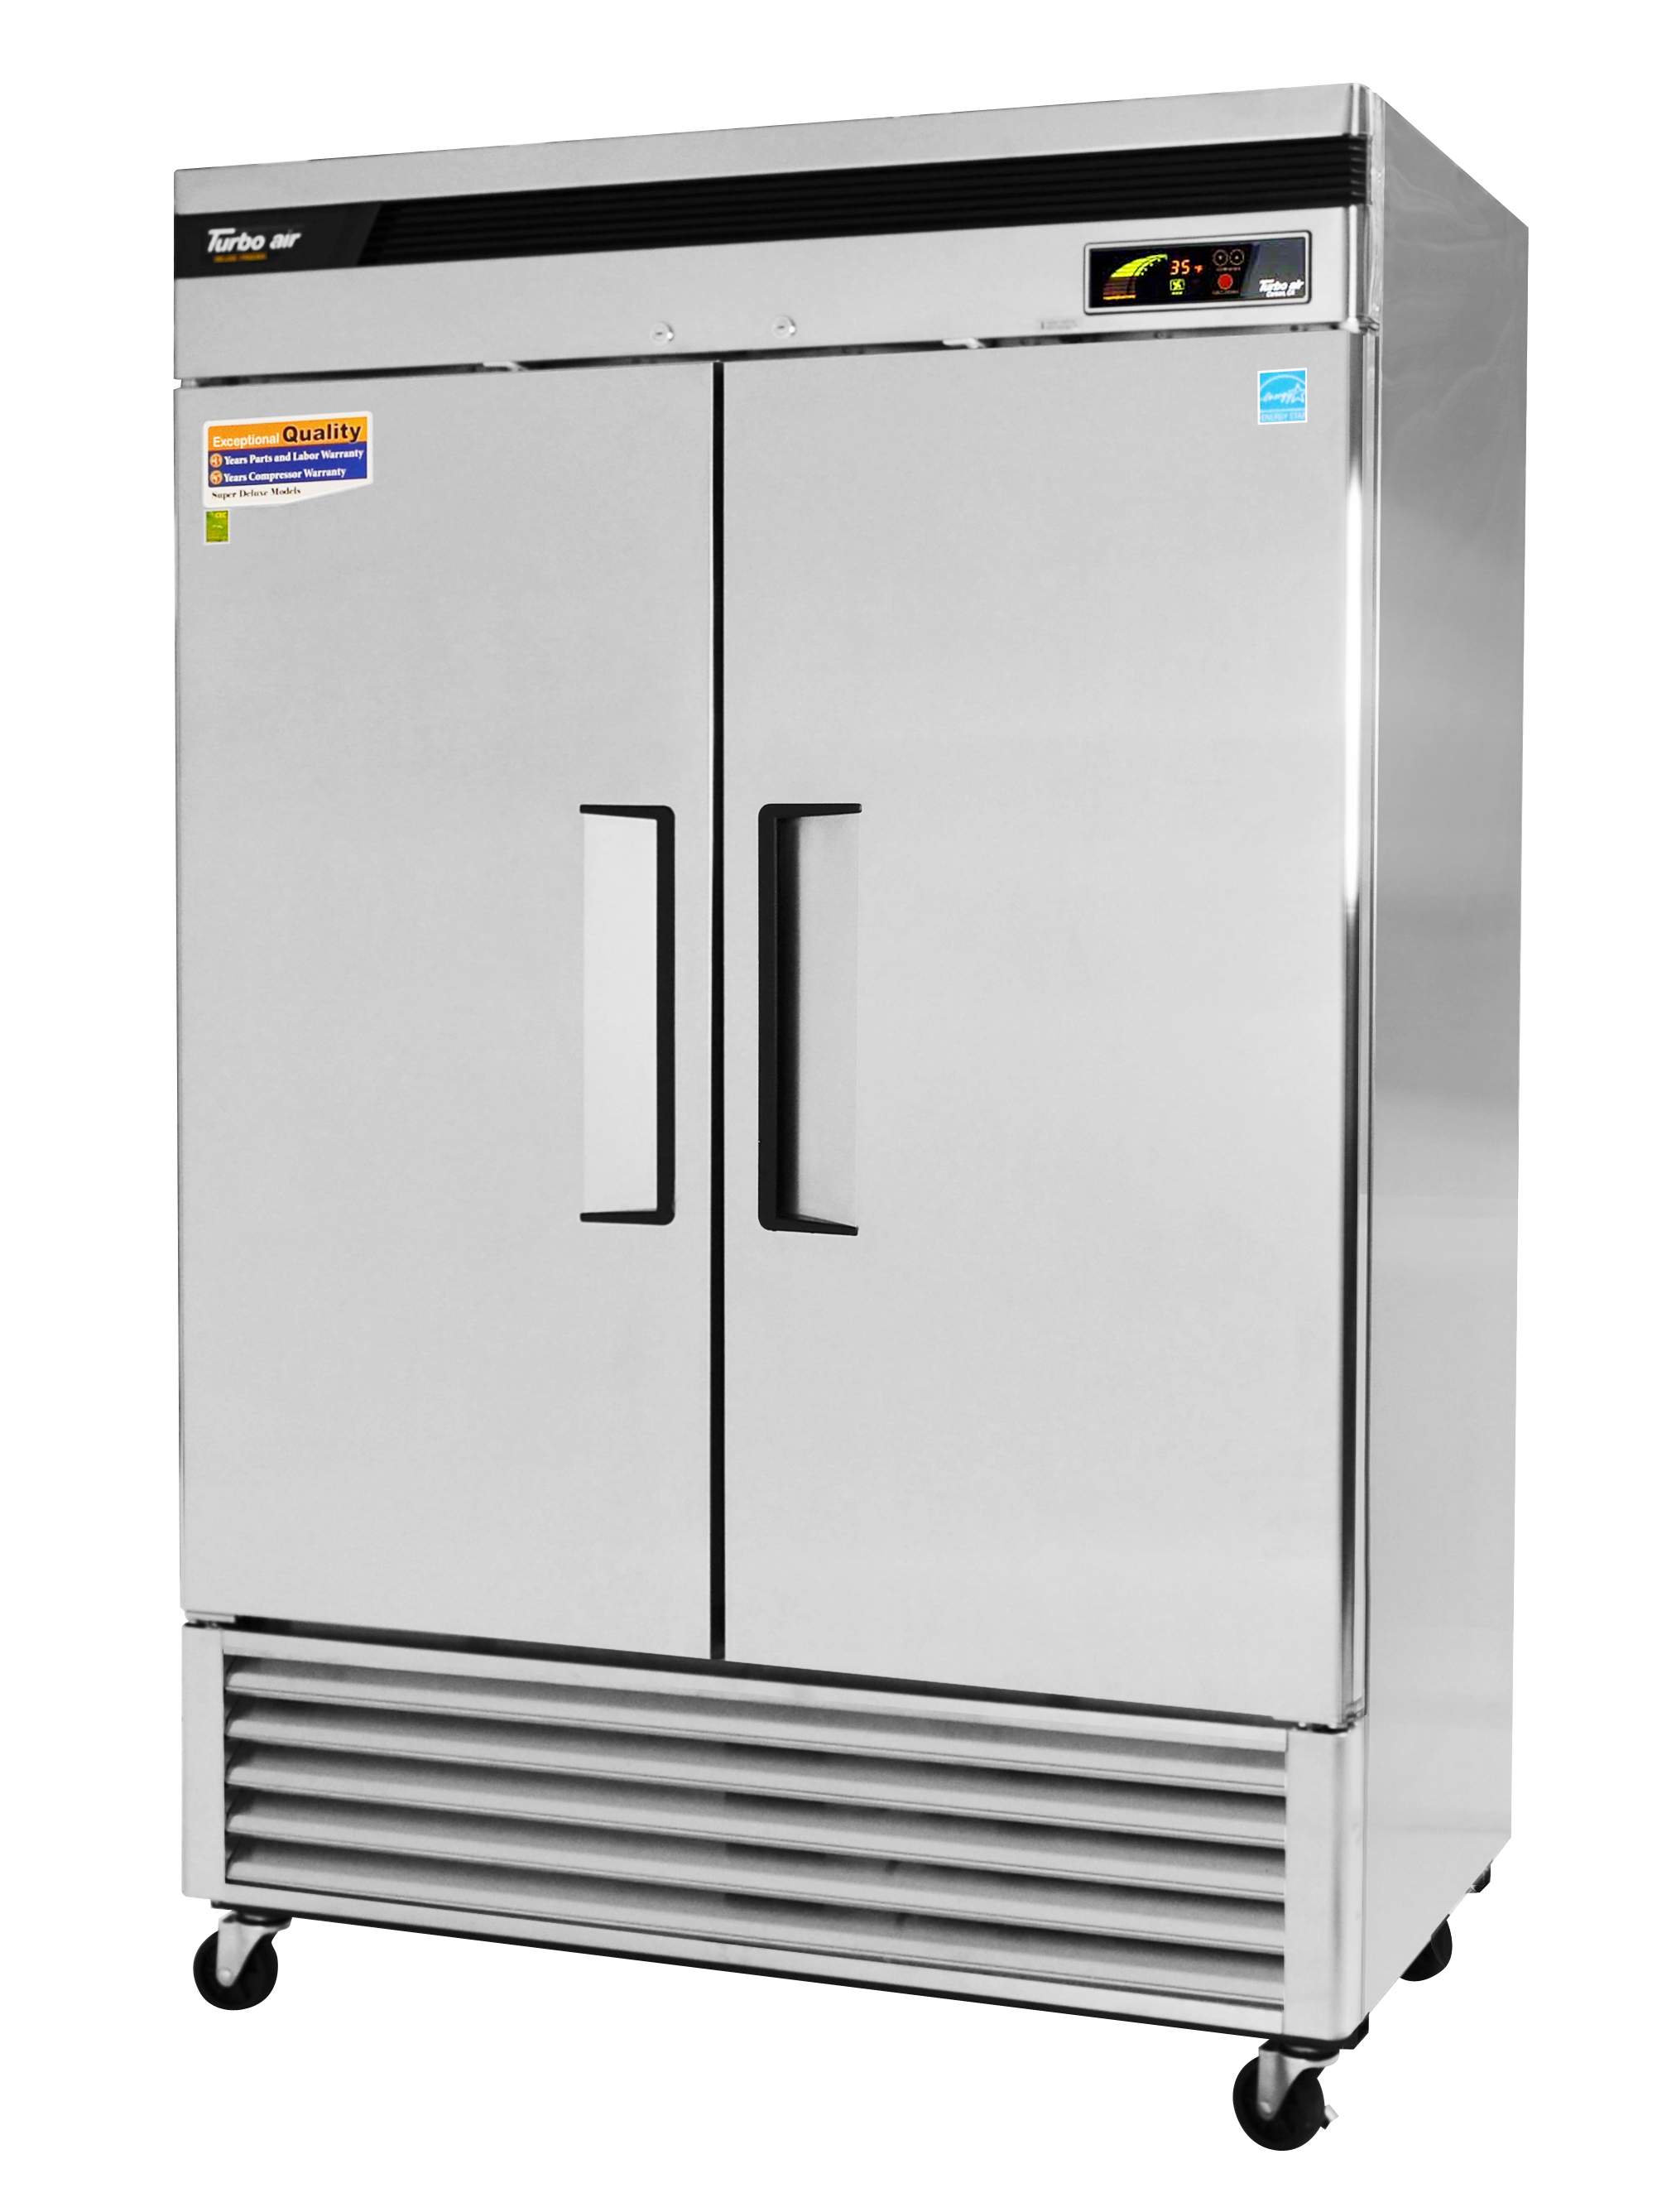 Super Deluxe Refrigerator, reach-in, two-section